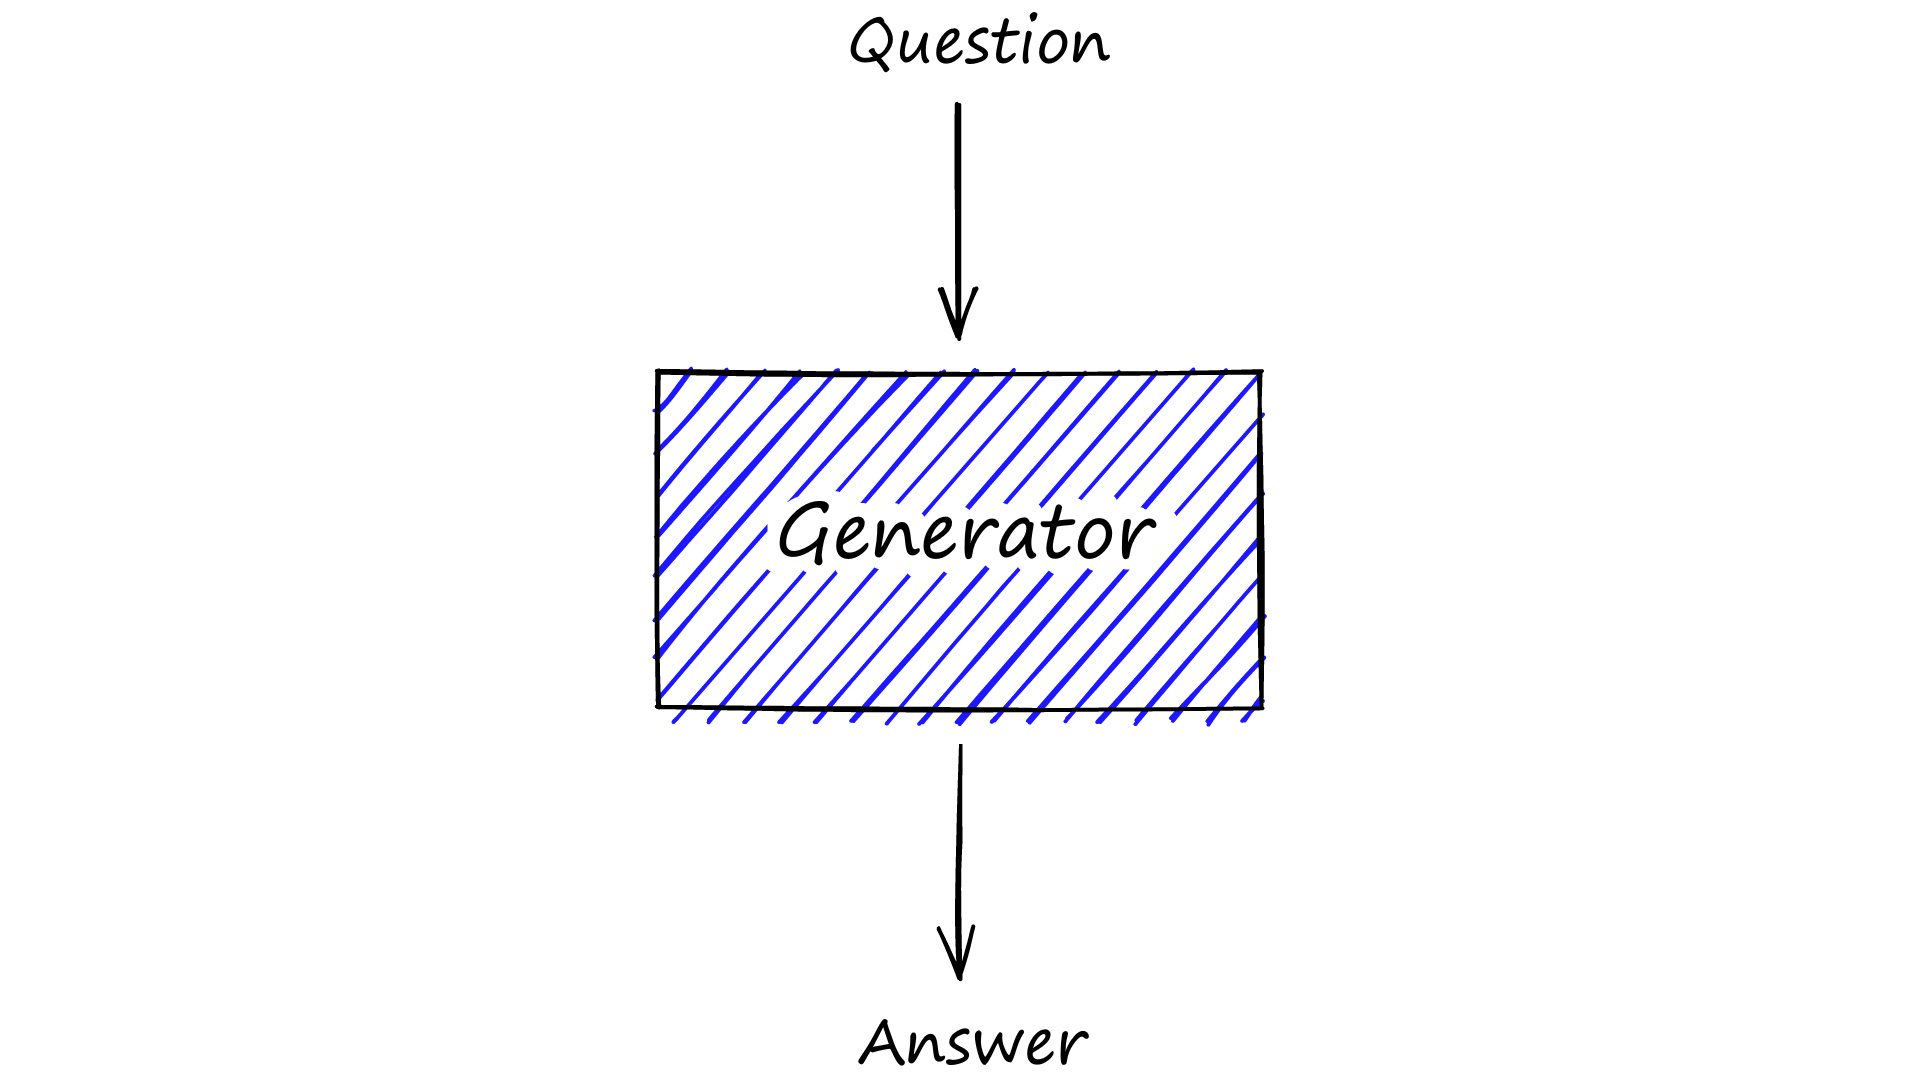 The closed-book architecture is much simpler, there is nothing more than a generator model.